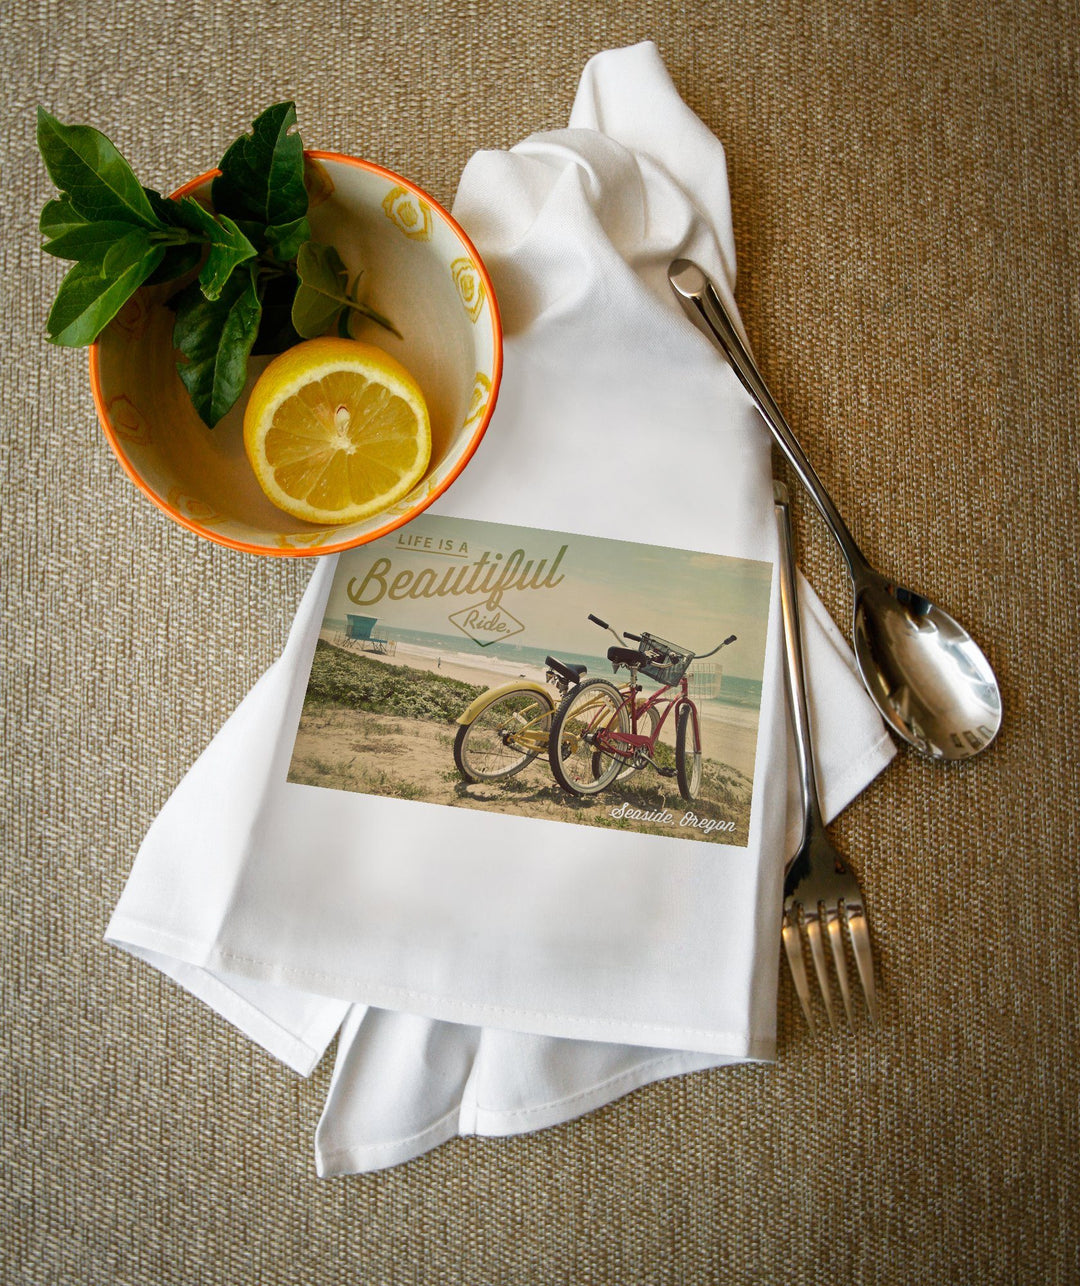 Seaside, Oregon, Life is a Beautiful Ride, Bicycles & Beach Scene, Photograph, Towels and Aprons Kitchen Lantern Press 